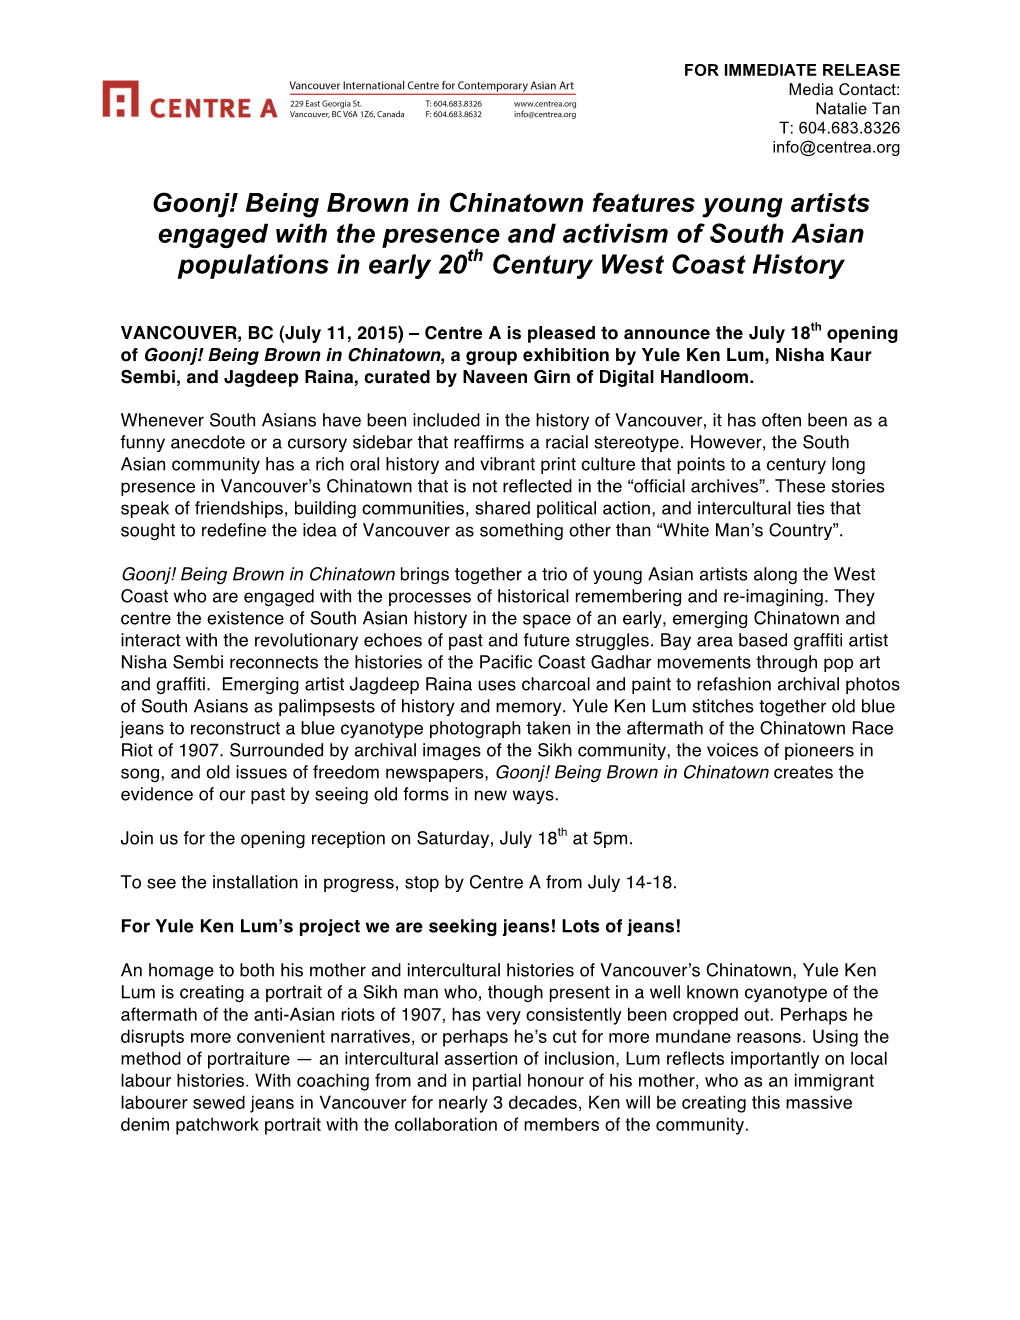 Goonj! Being Brown in Chinatown Features Young Artists Engaged with the Presence and Activism of South Asian Populations in Early 20Th Century West Coast History